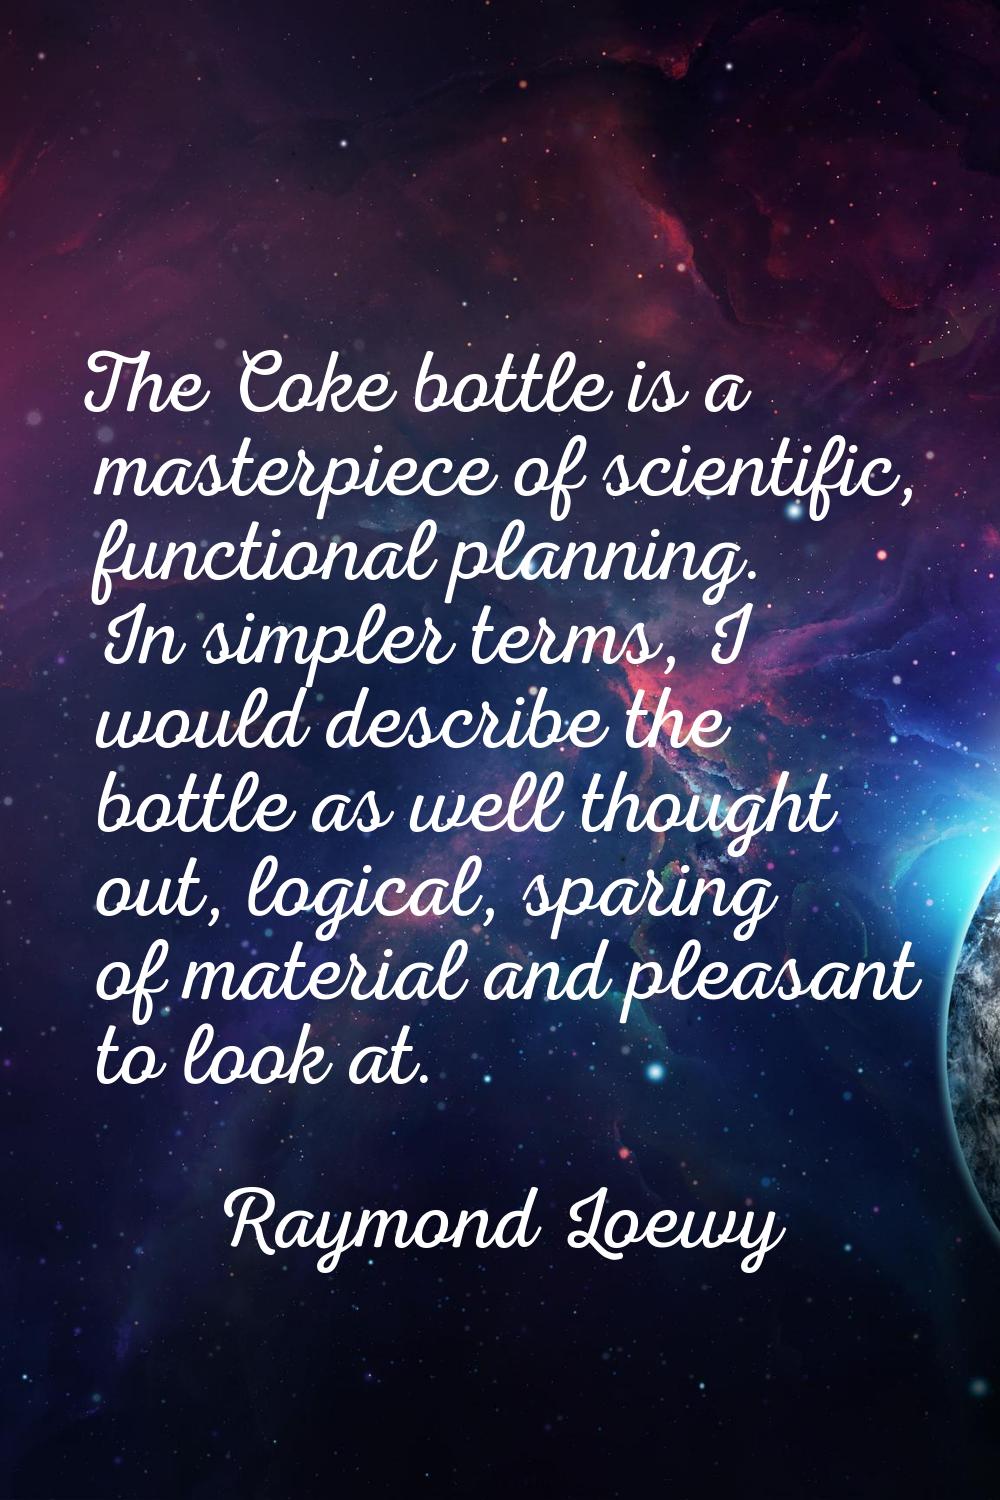 The Coke bottle is a masterpiece of scientific, functional planning. In simpler terms, I would desc